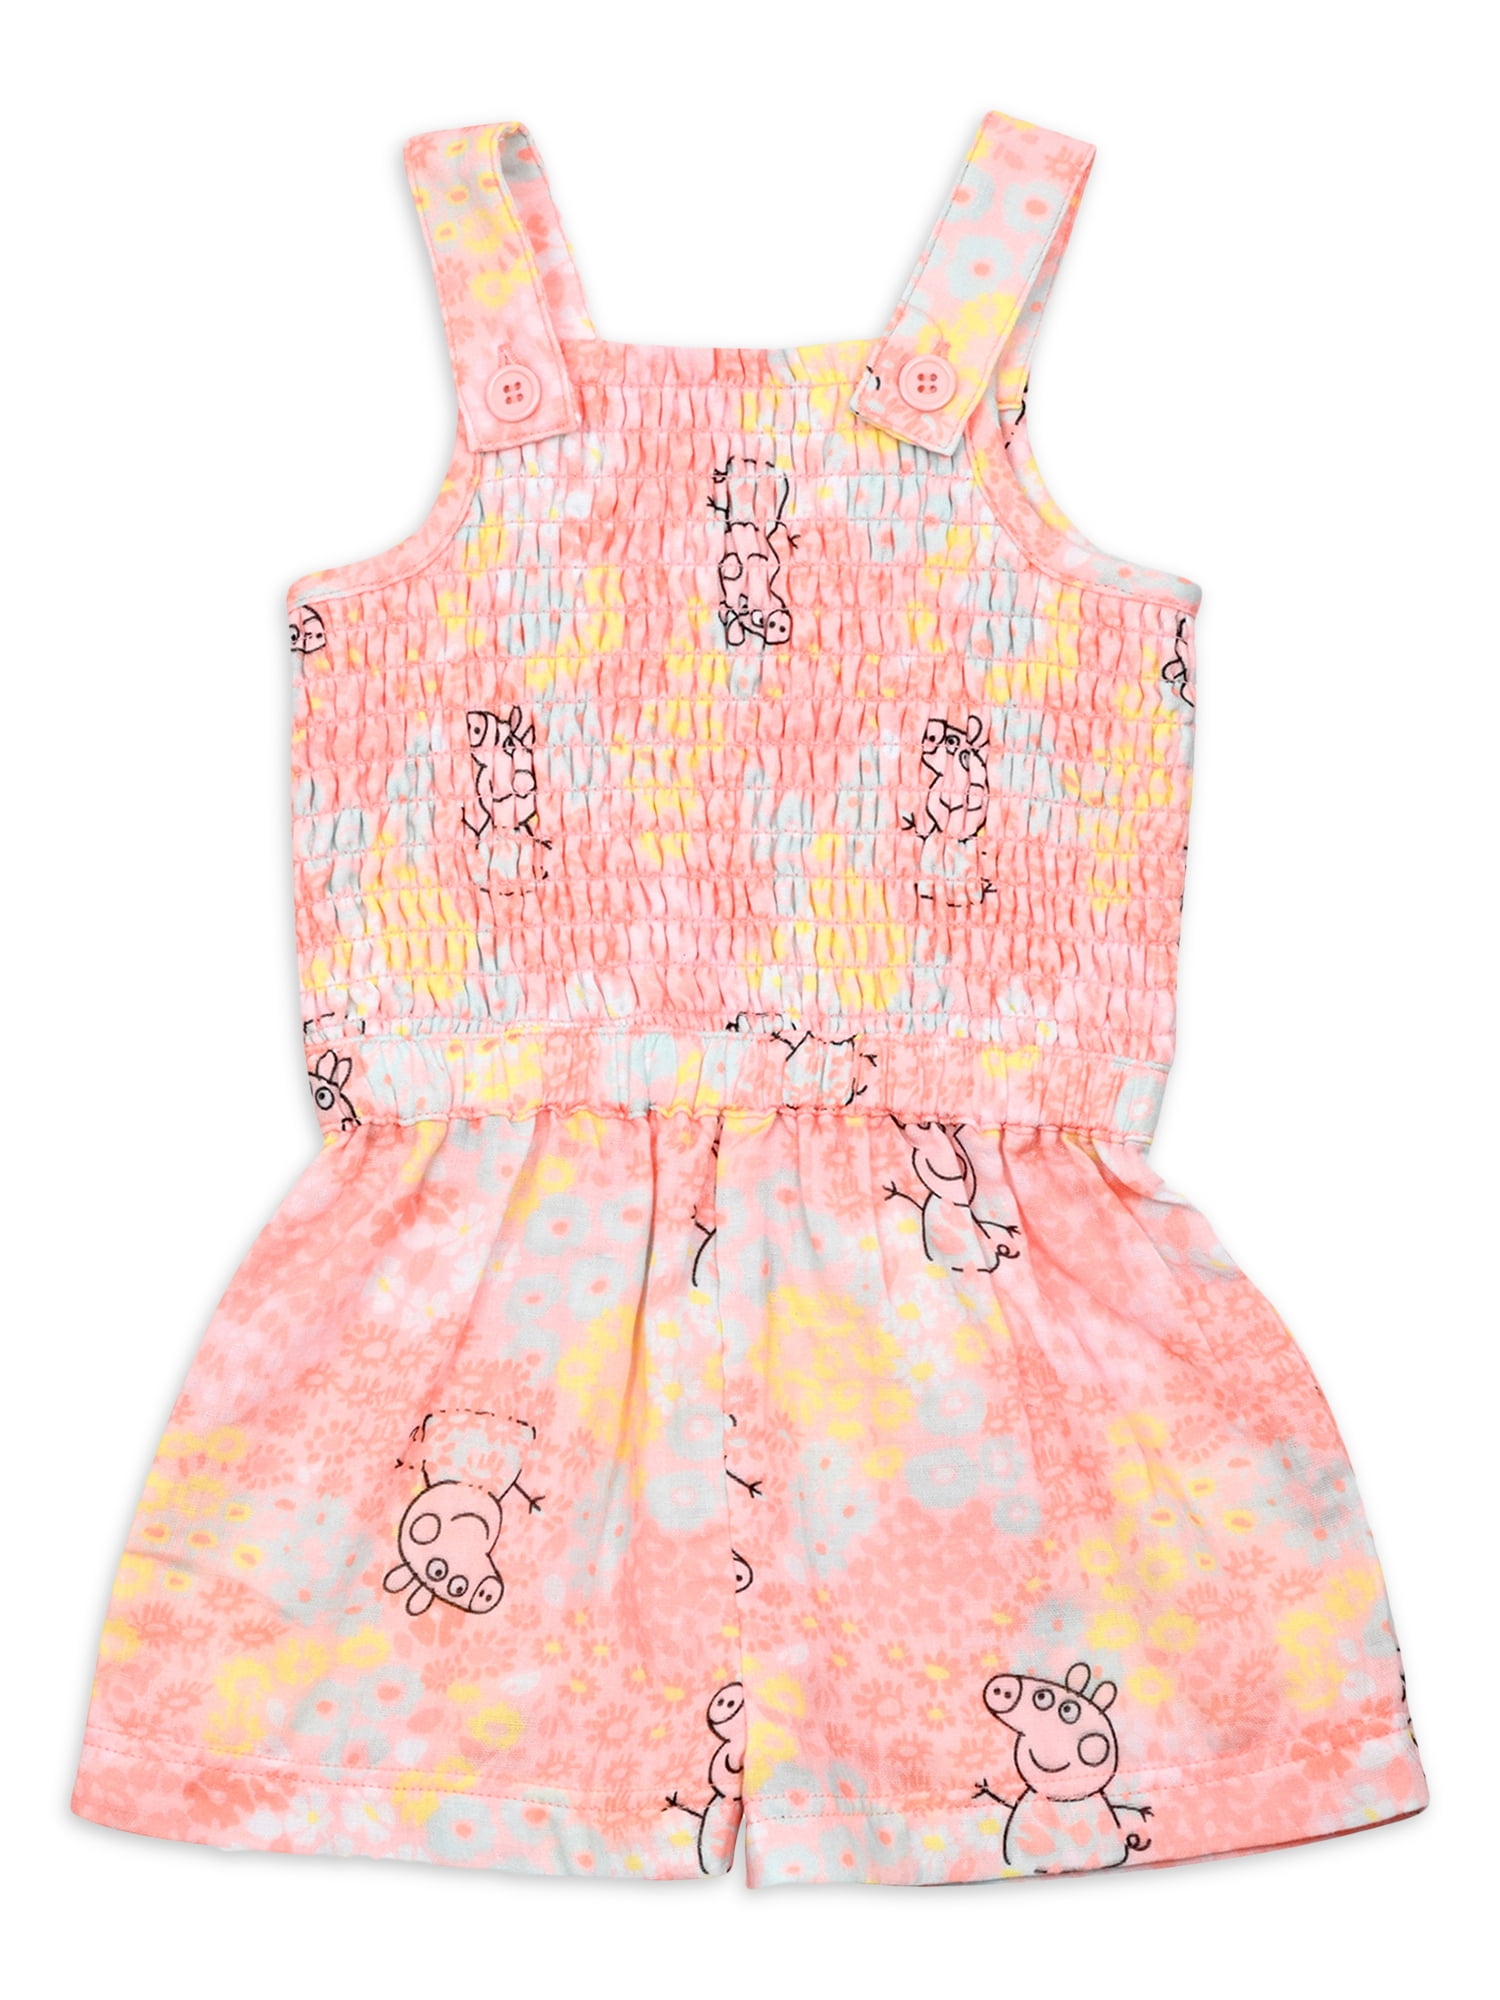 Peppa Pig Baby and Toddler Girl Romper, 12 Months-5T - Walmart.com